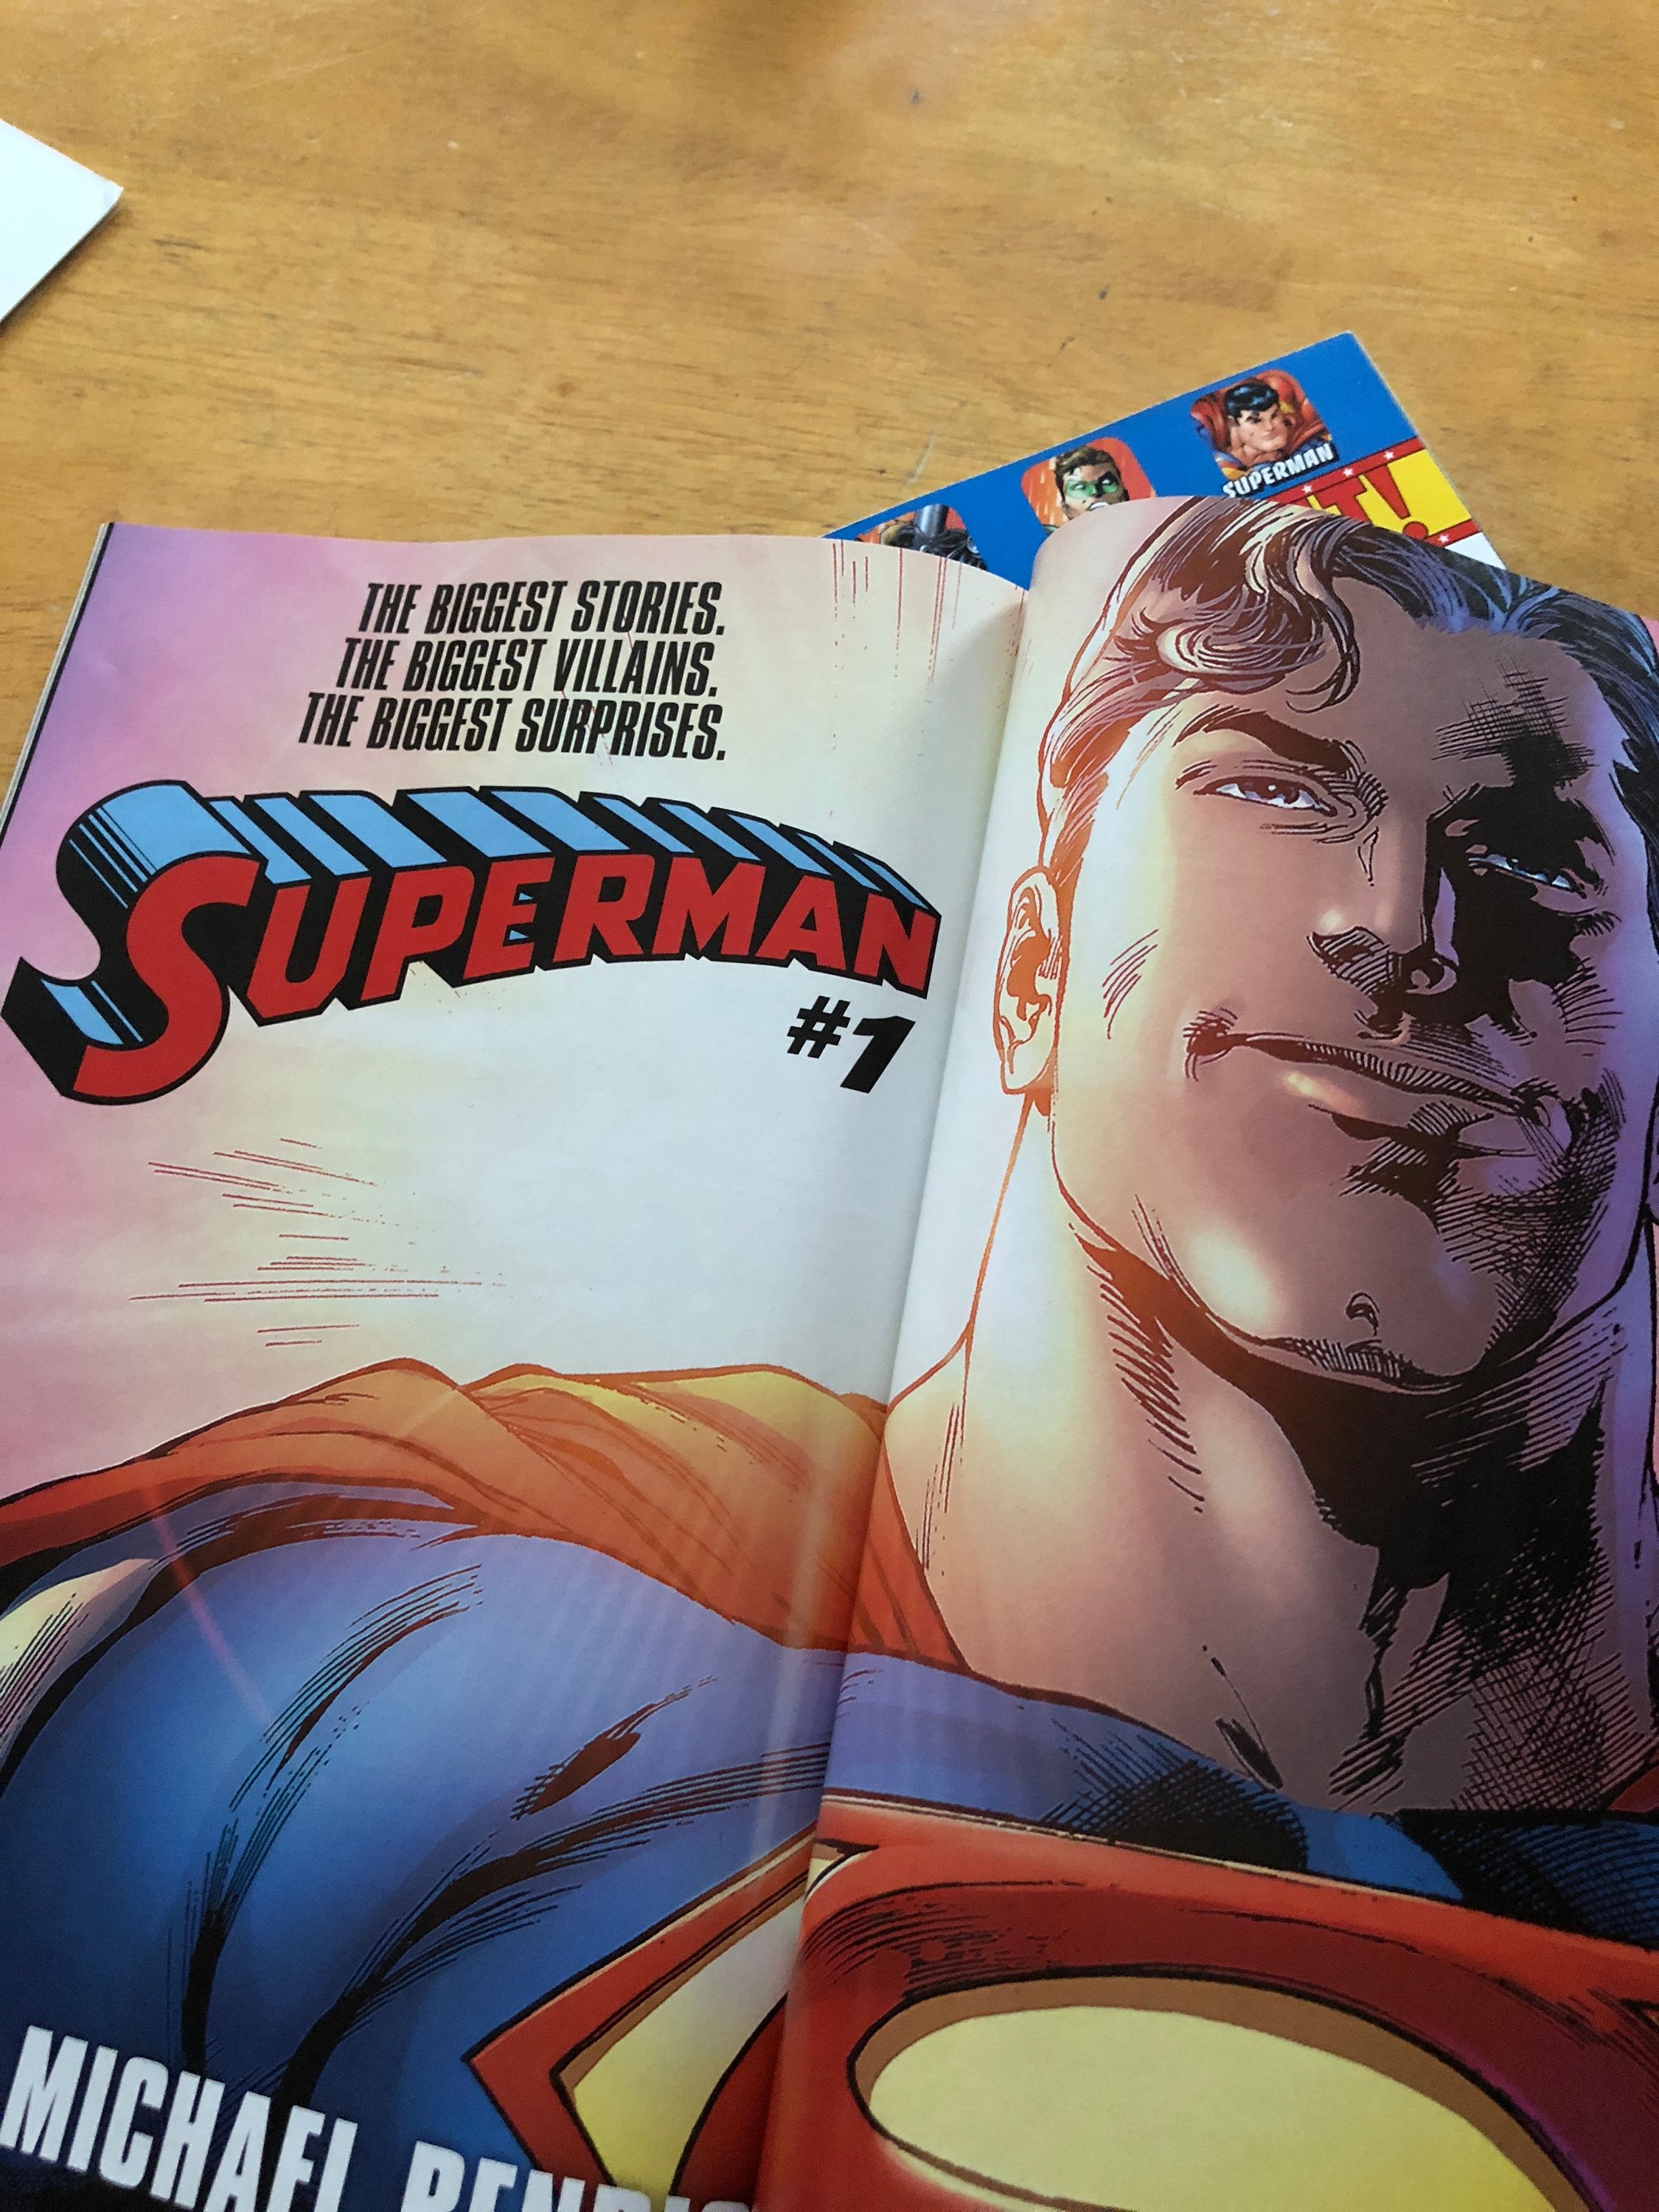 an interior ad for the new Bendis written Superman #1. Shows Superman from the chest up smiling. Text reads: THE BIGGEST STORIES. THE BIGGEST VILLAINS. THE BIGGEST SURPRISES. Superman #1